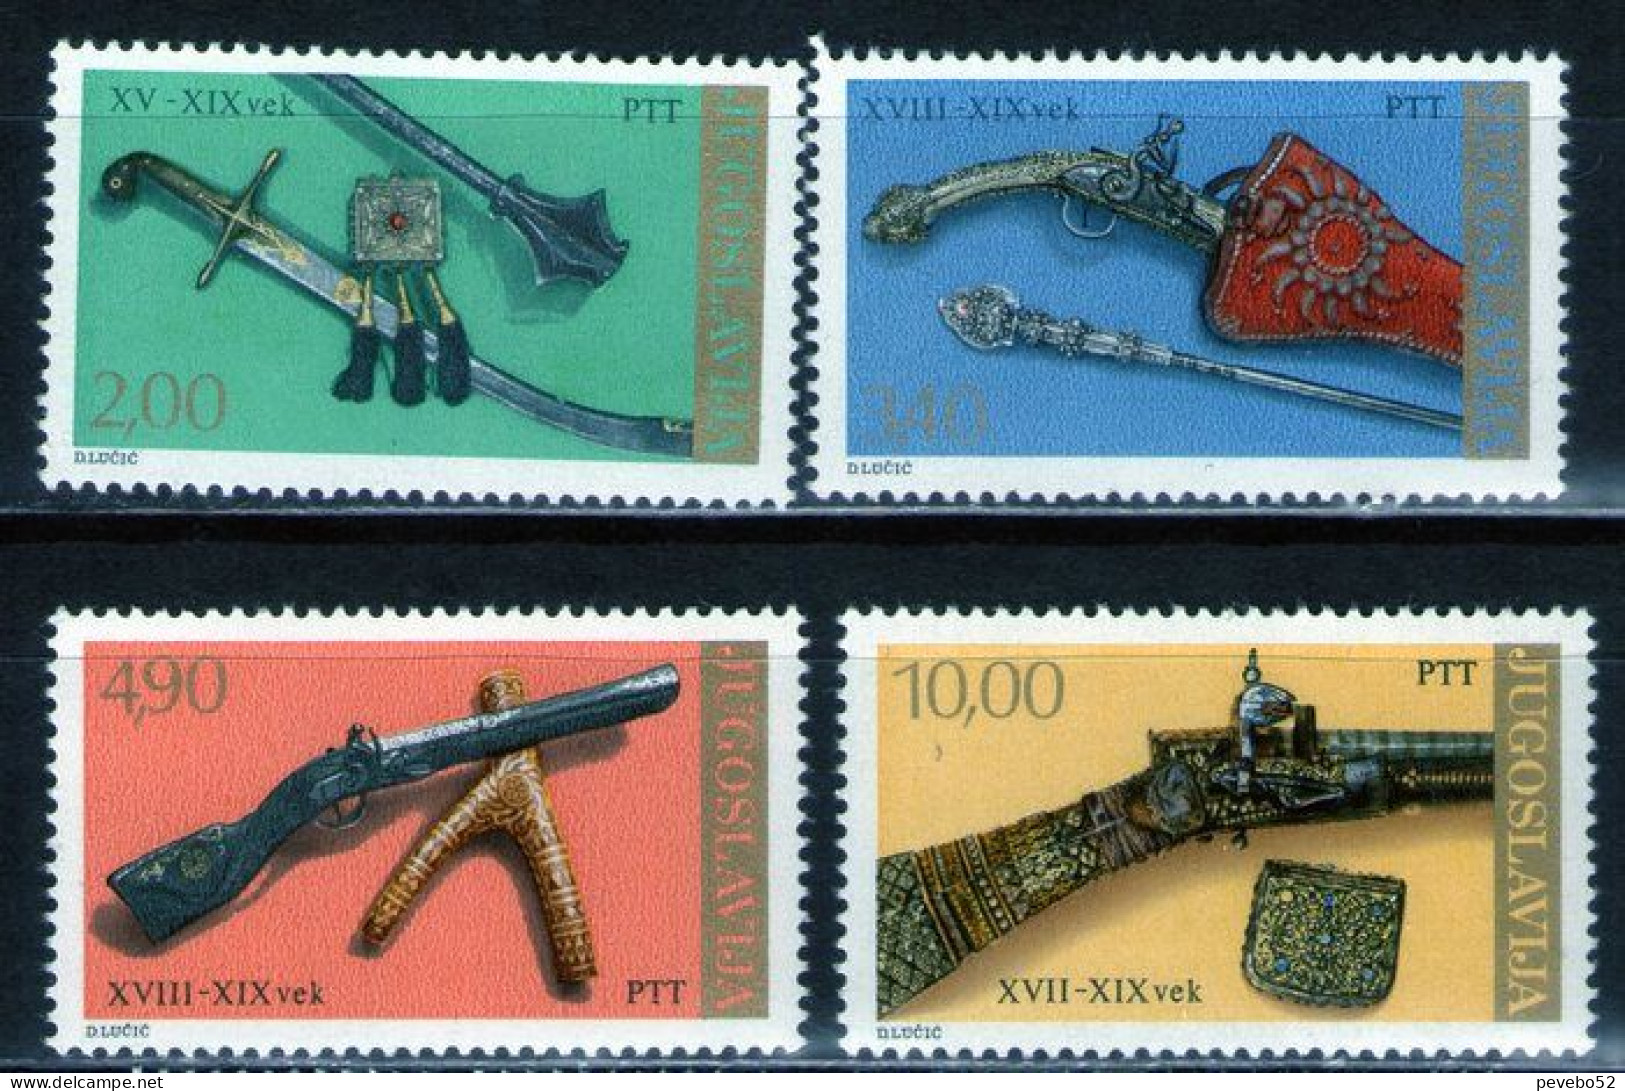 YUGOSLAVIA 1979 - Antique Weapons MNH - Unused Stamps